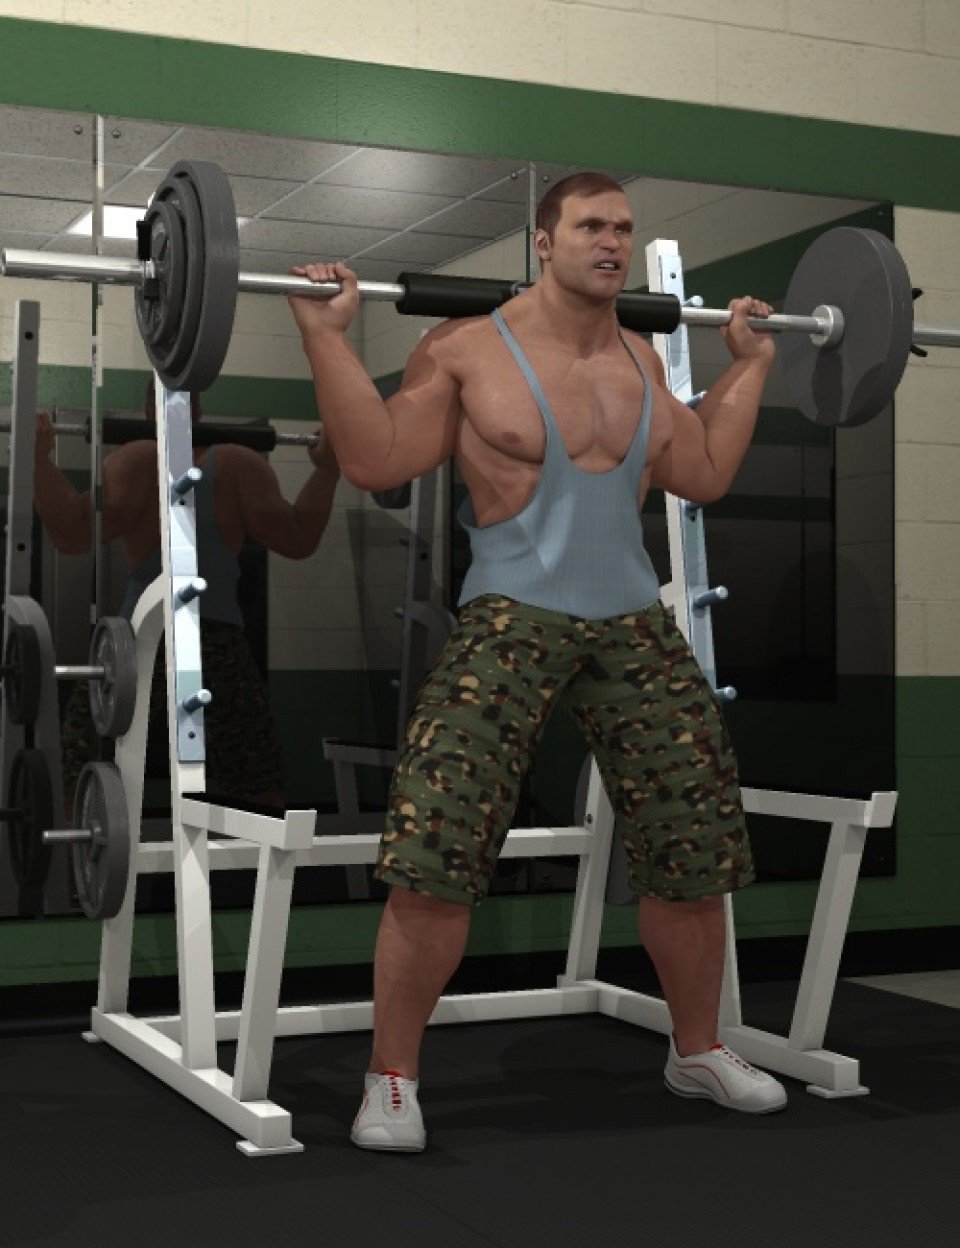 Free Weight Gym and Poses_DAZ3D下载站